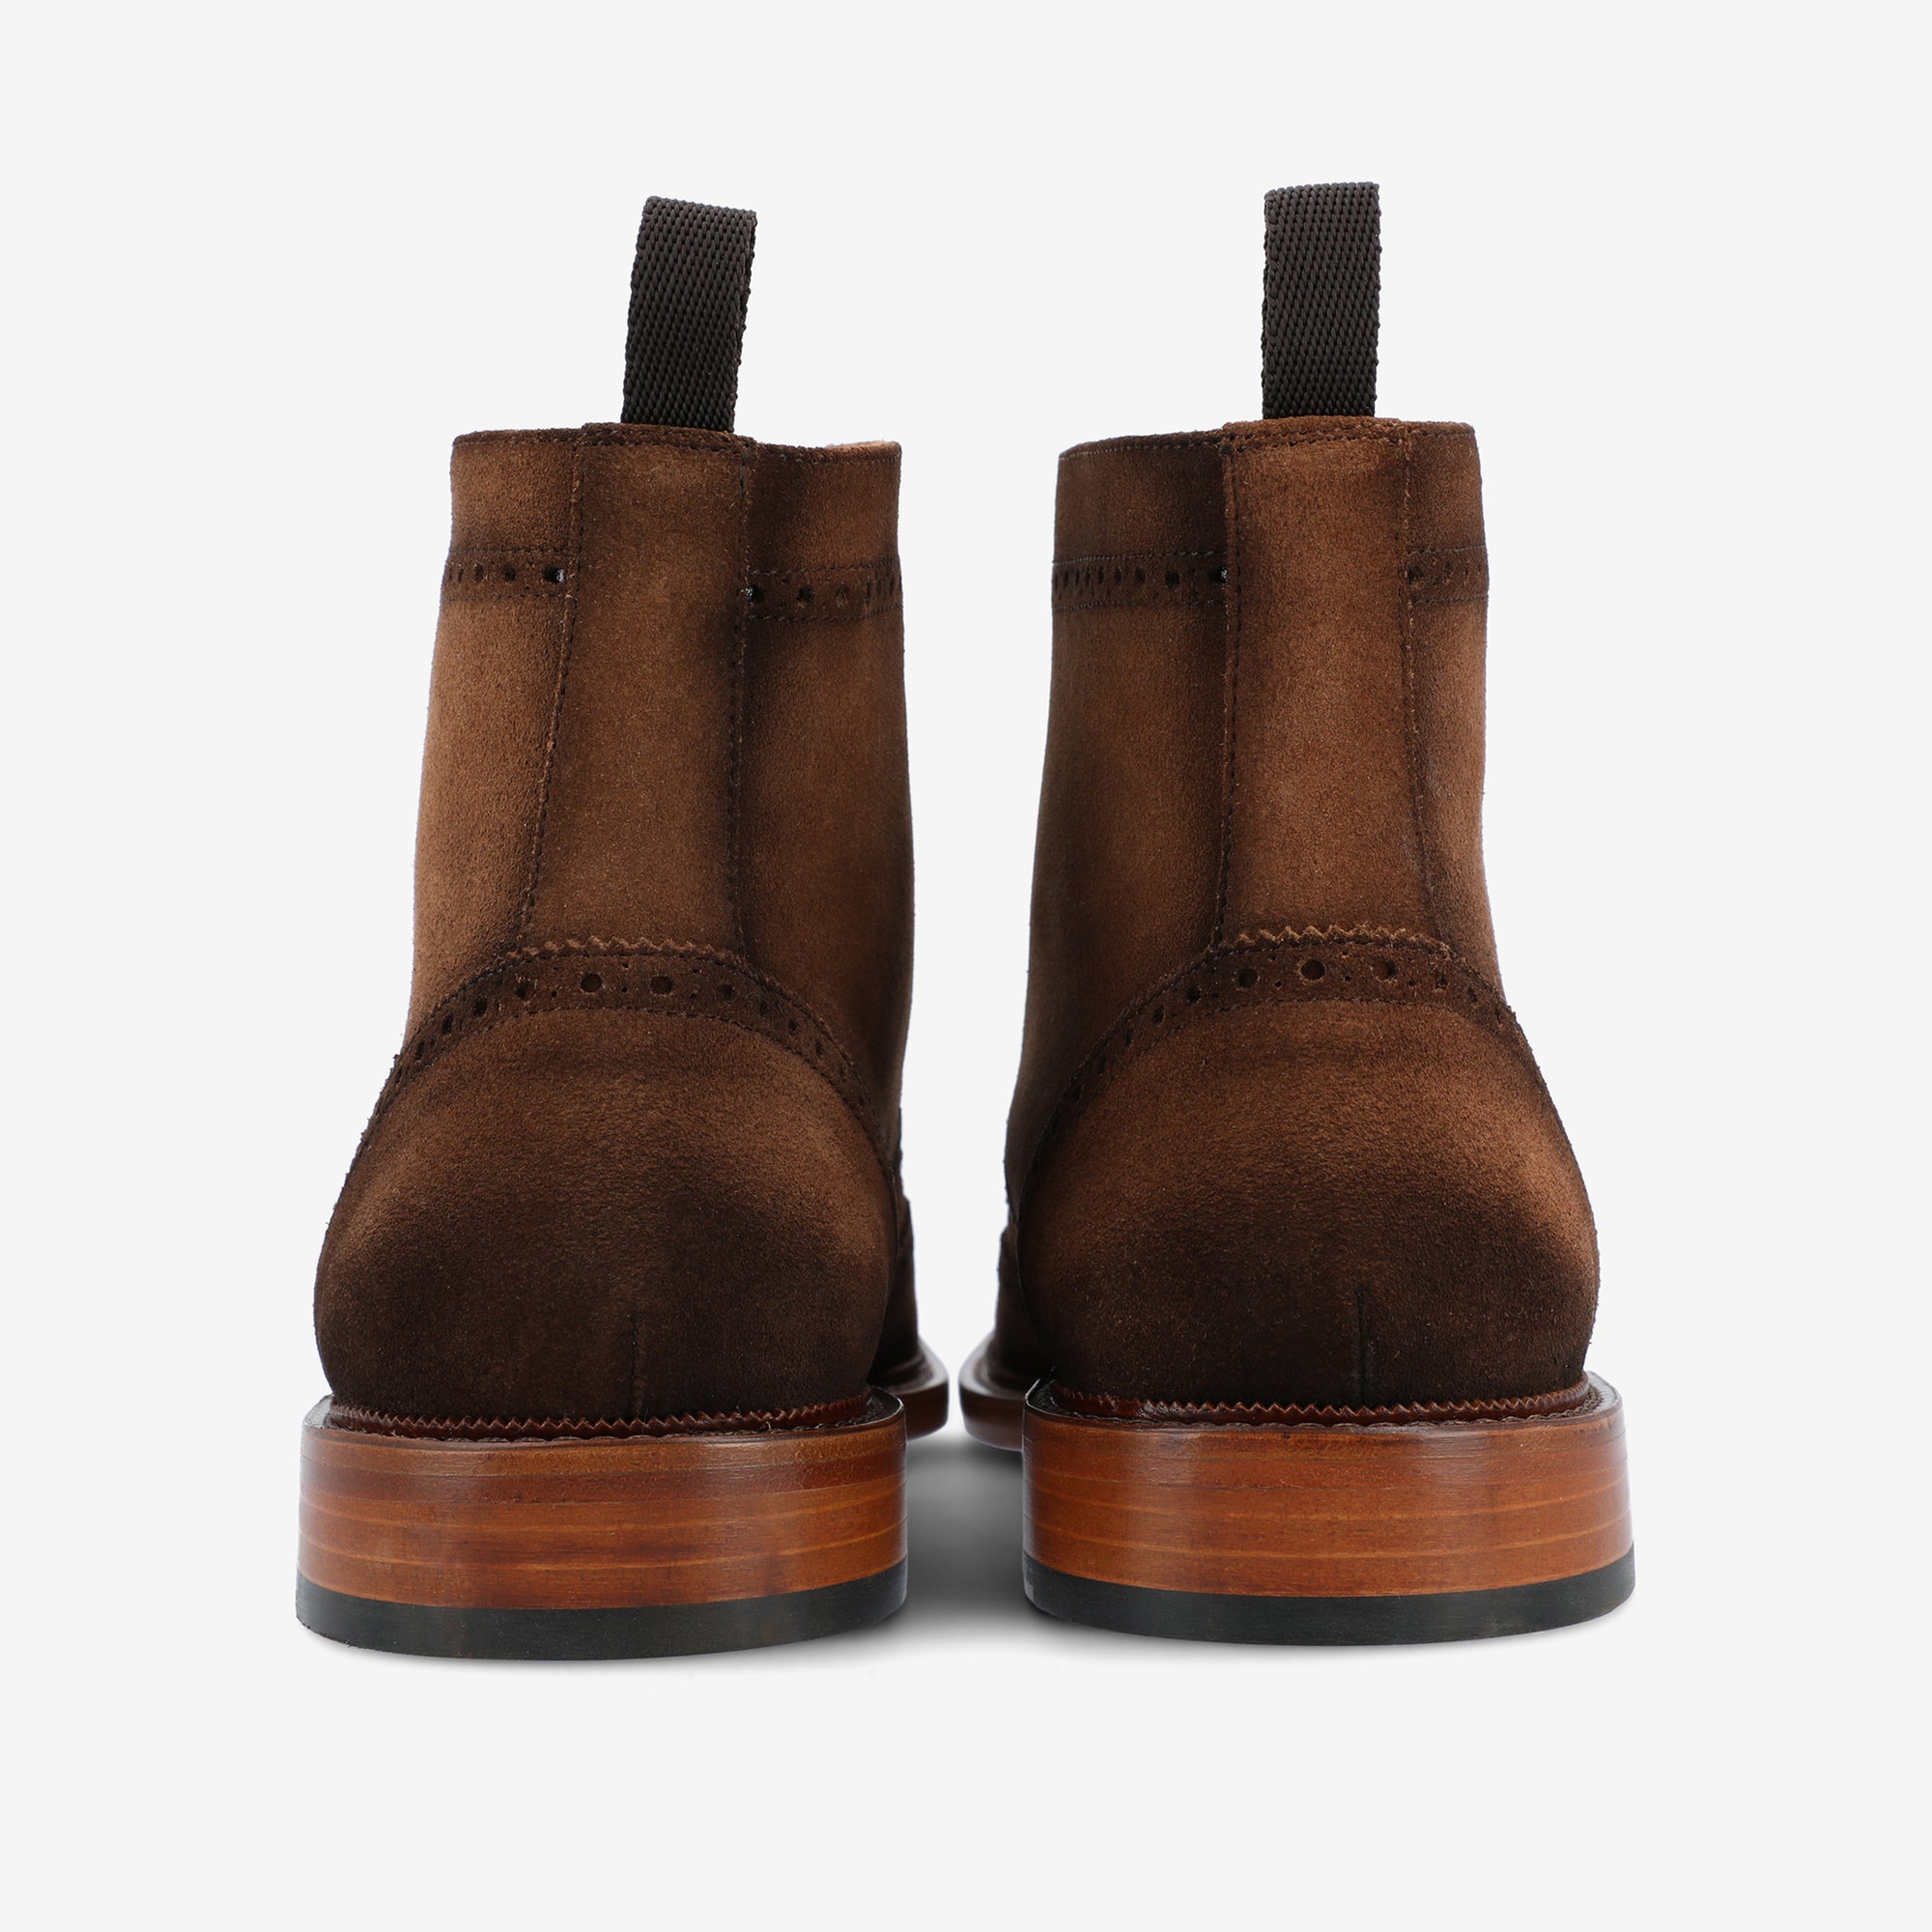 The Mack Boot in Brown